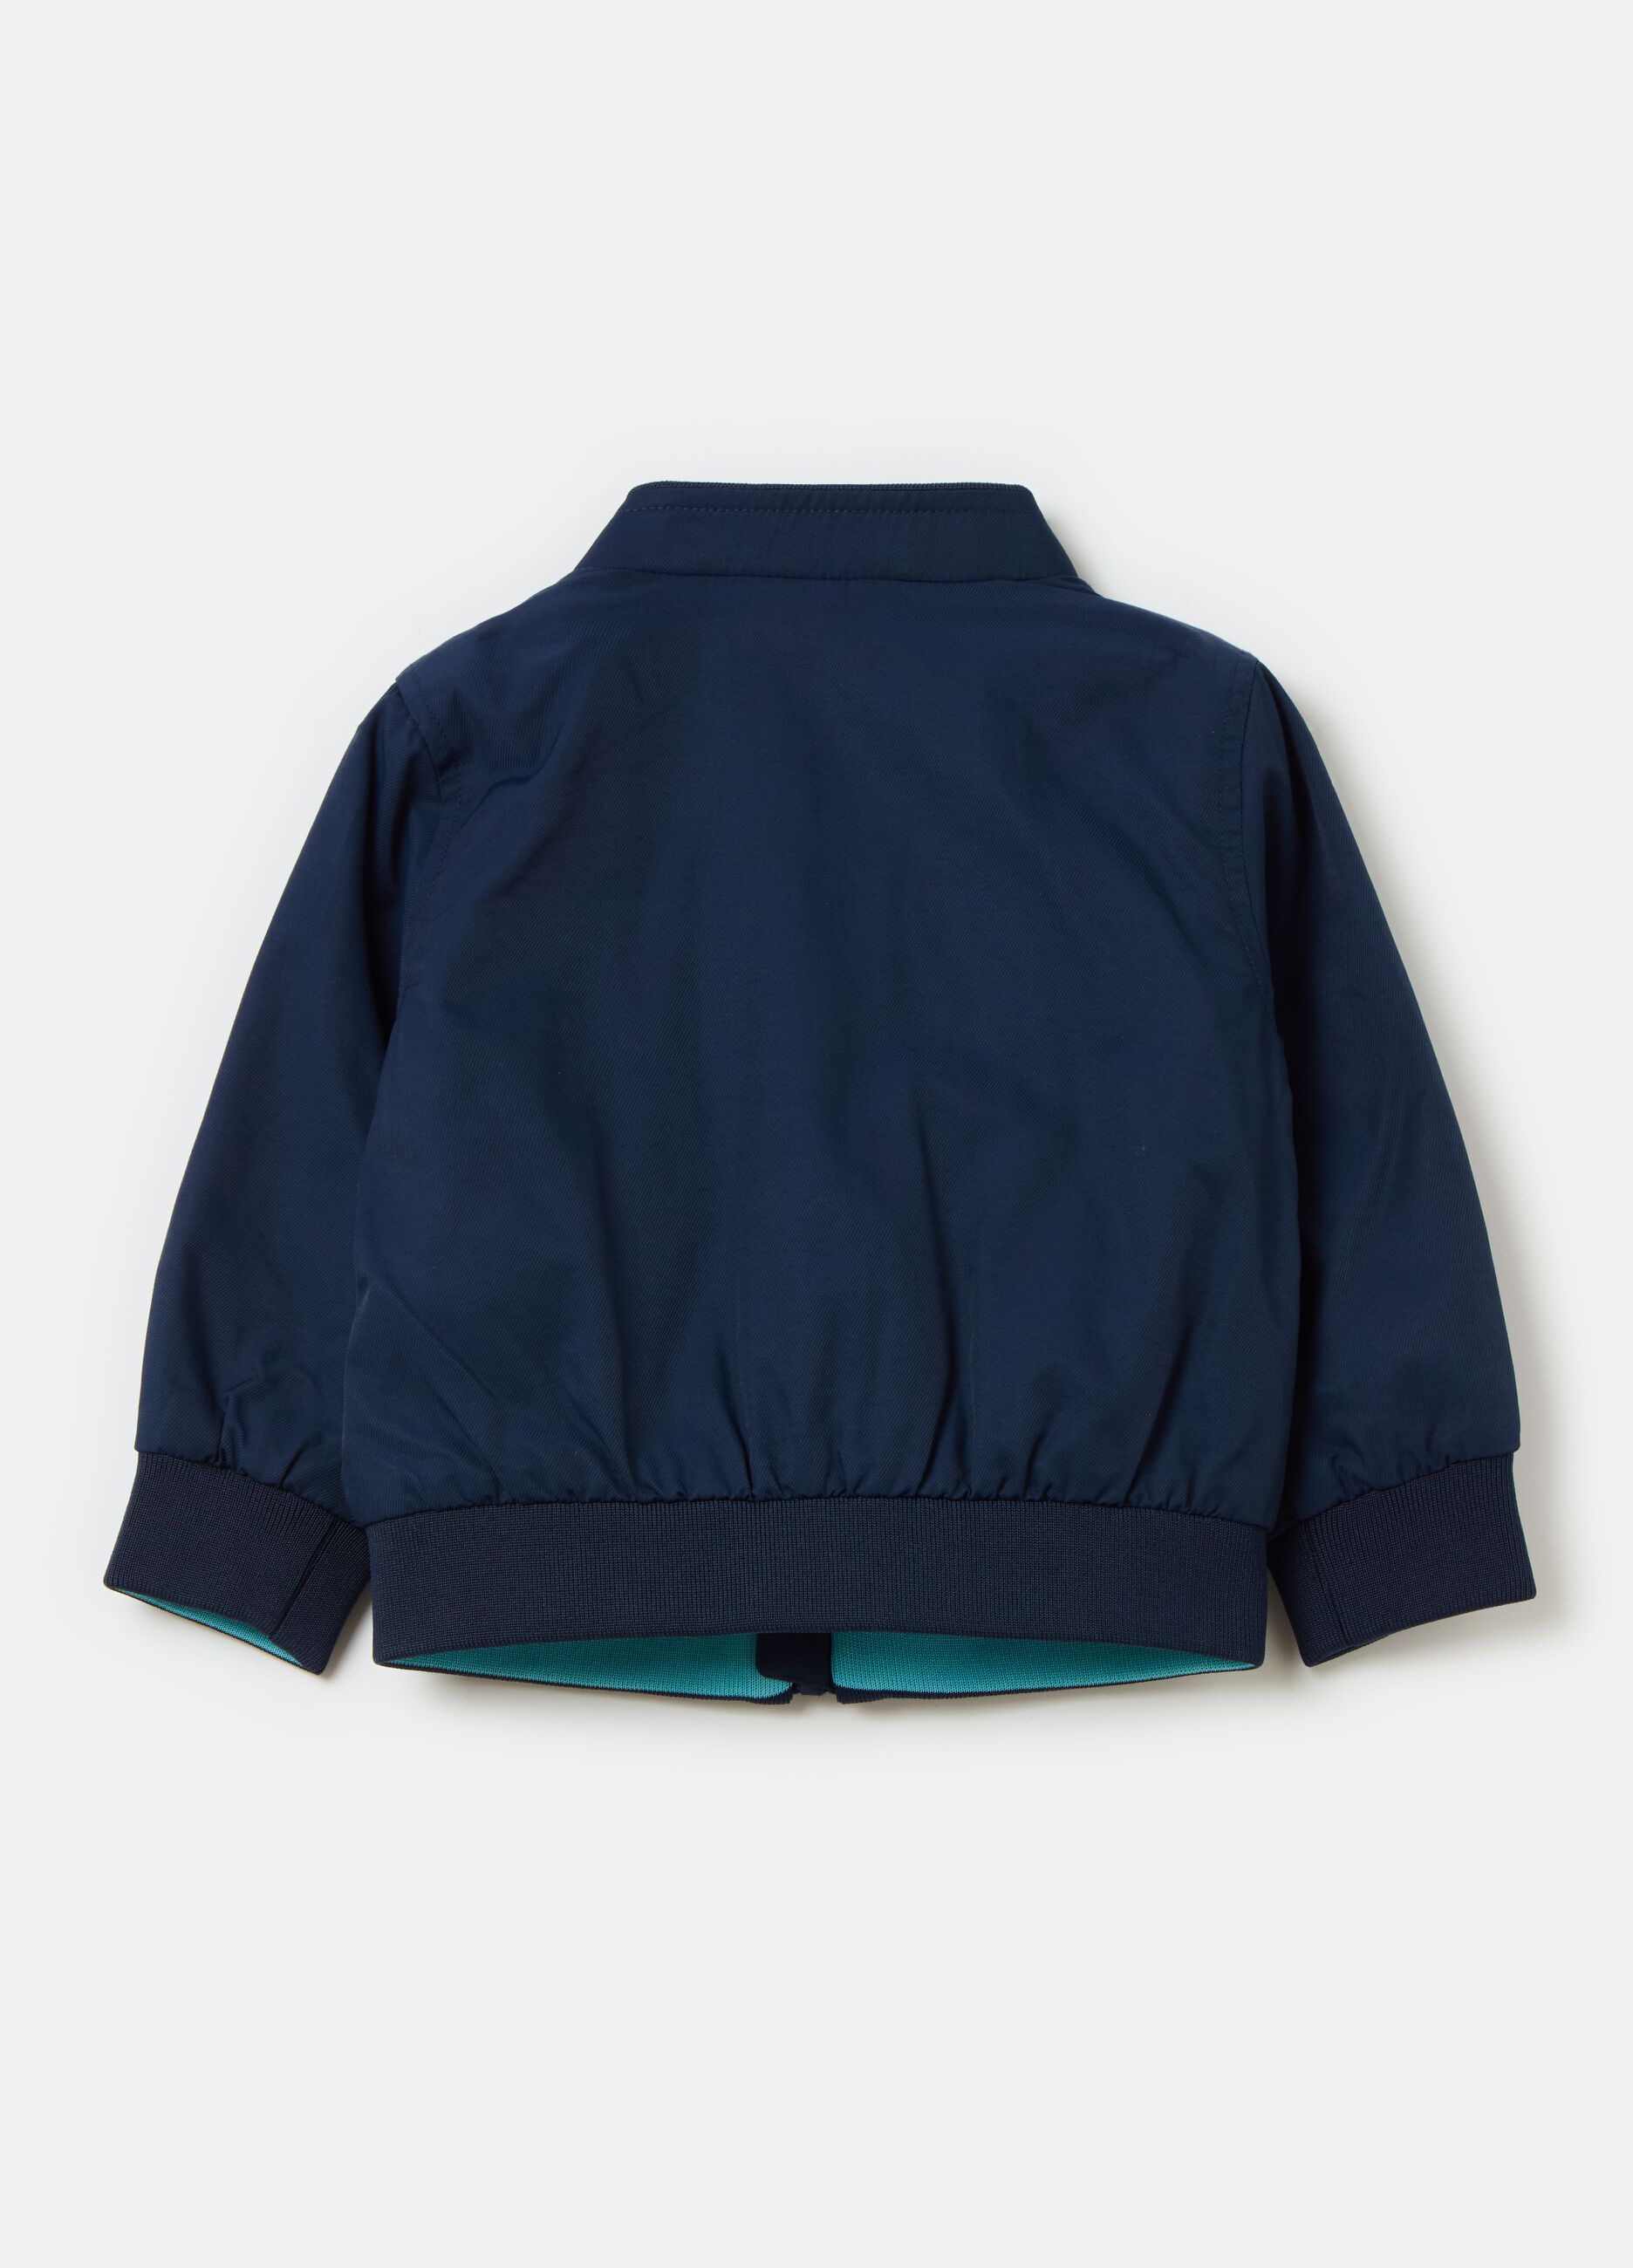 Bomber jacket with sail boat embroidery